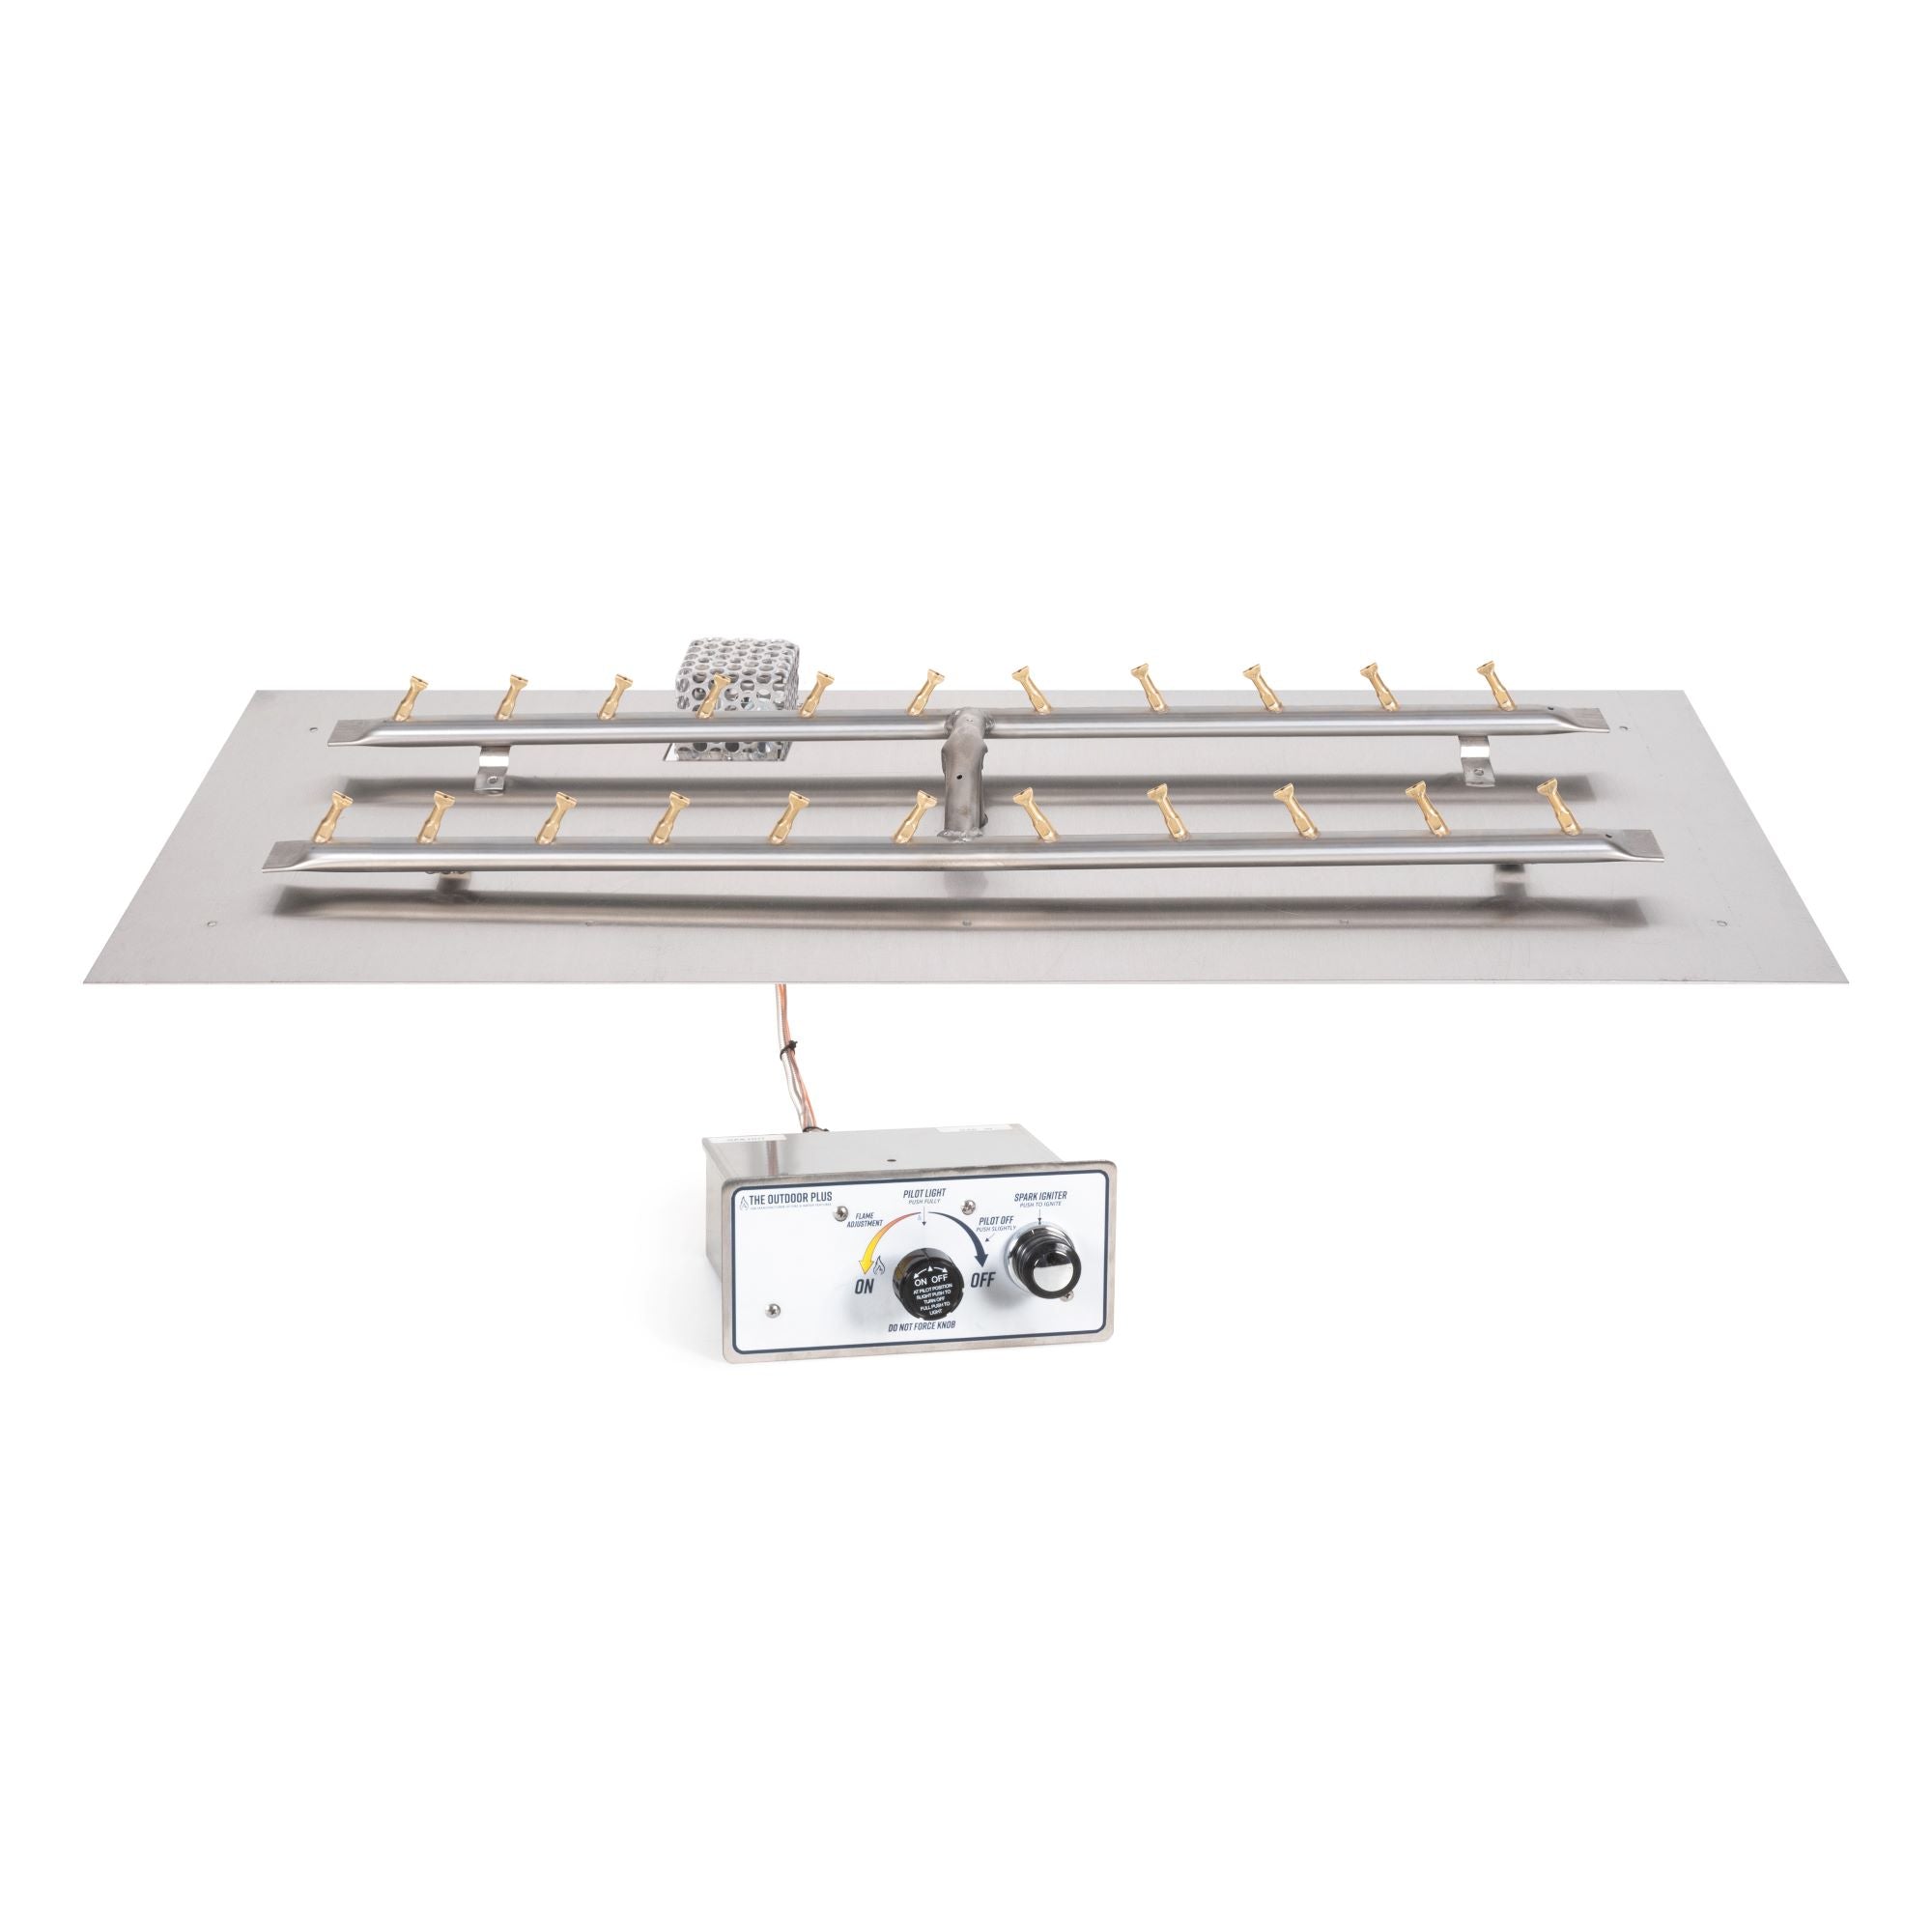 The Outdoor Plus Rectangular Flat Pan with Stainless Steel 'H' Bullet Burner